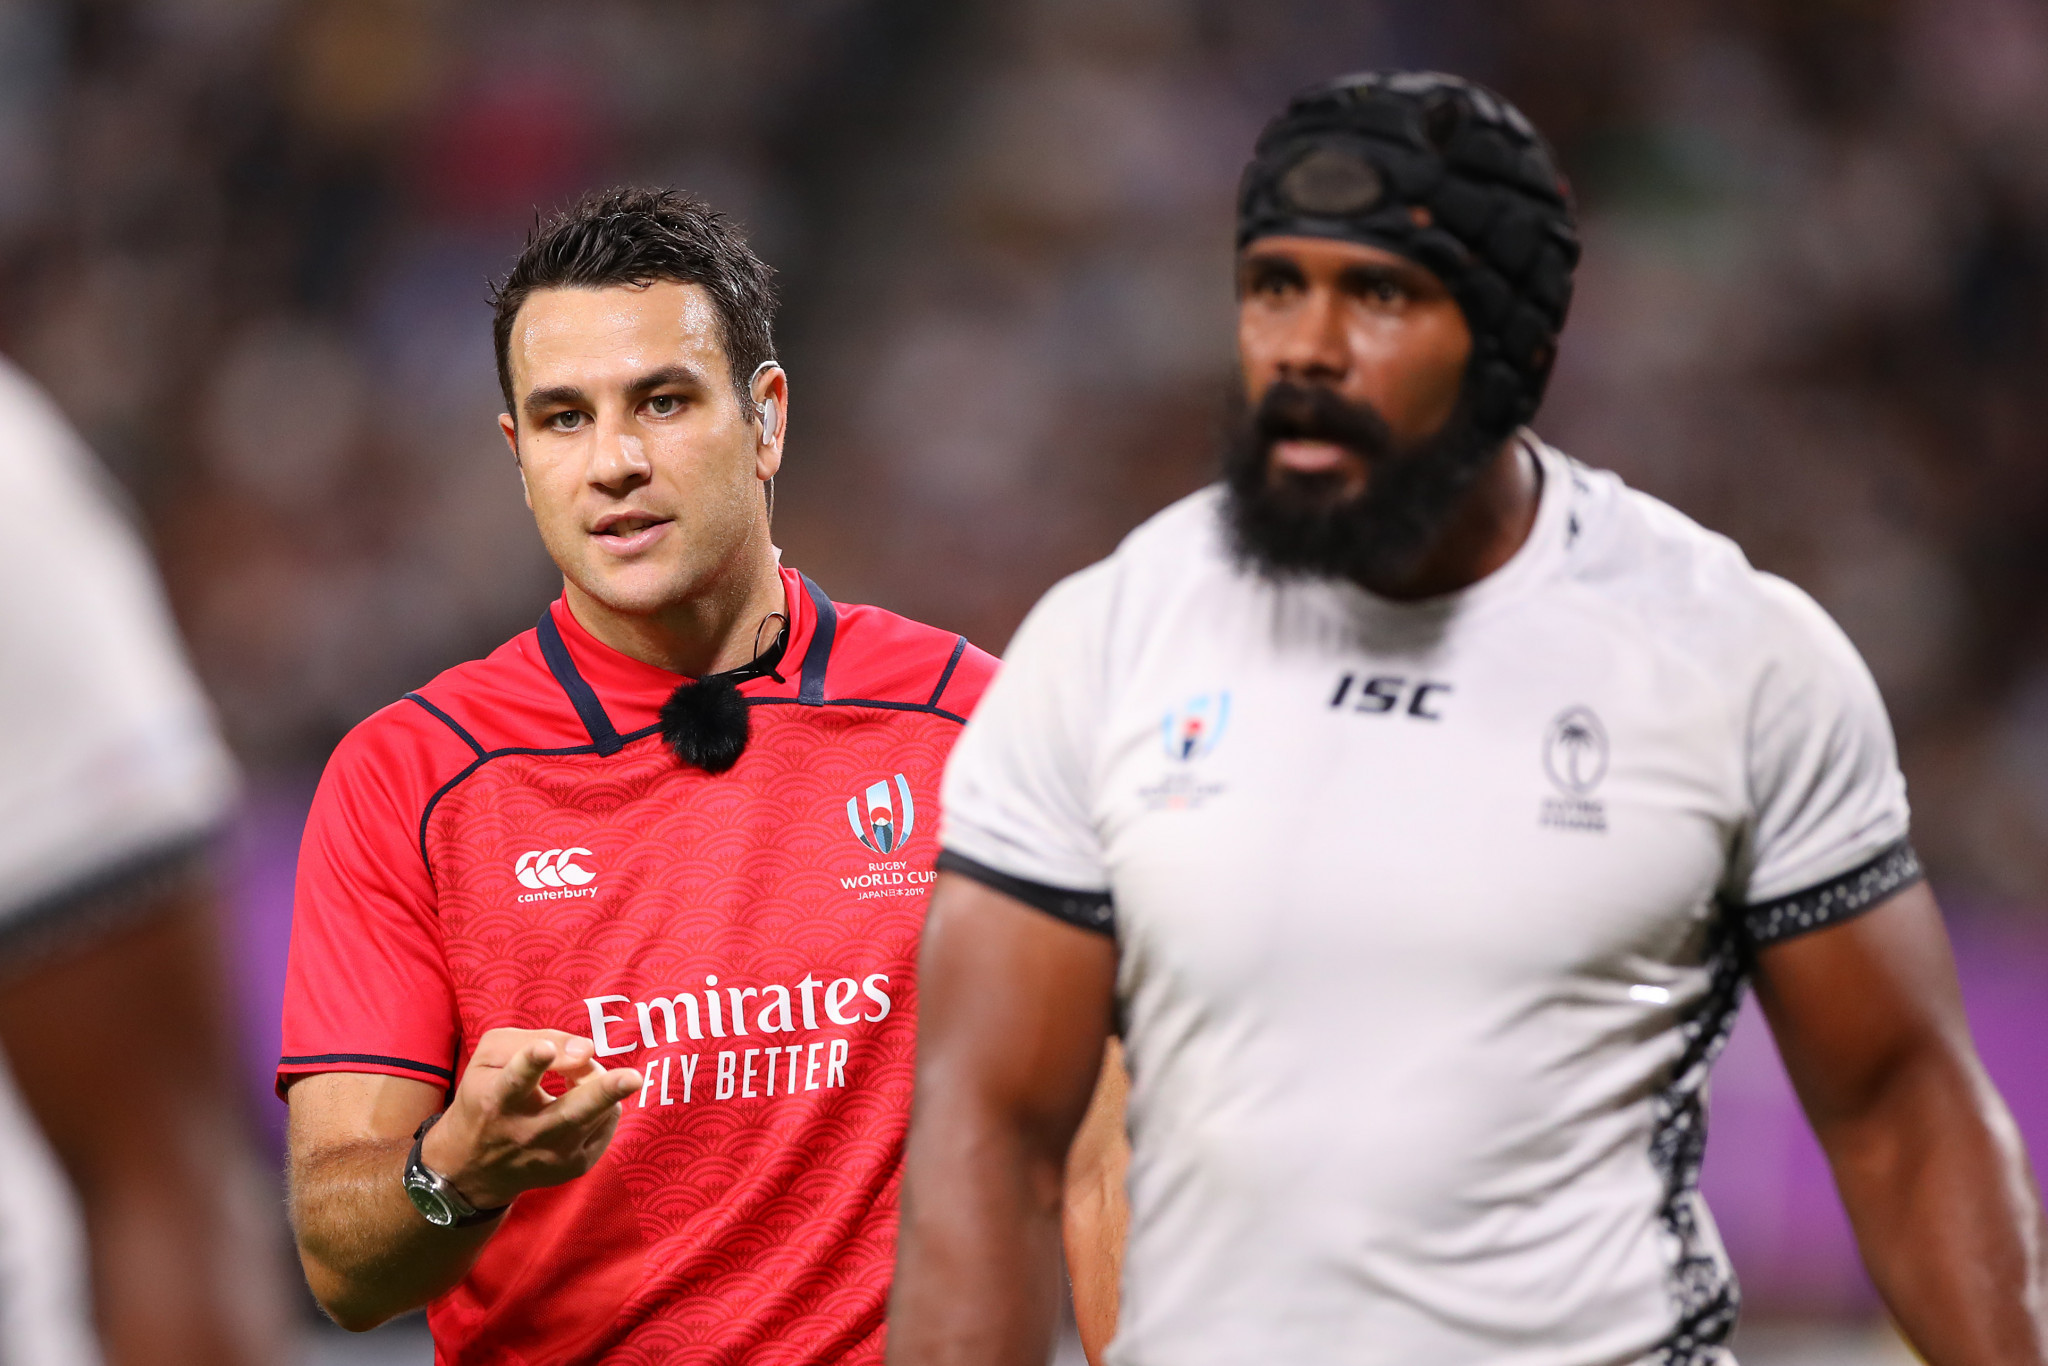 Rugby referees under fire after just five days of the World Cup